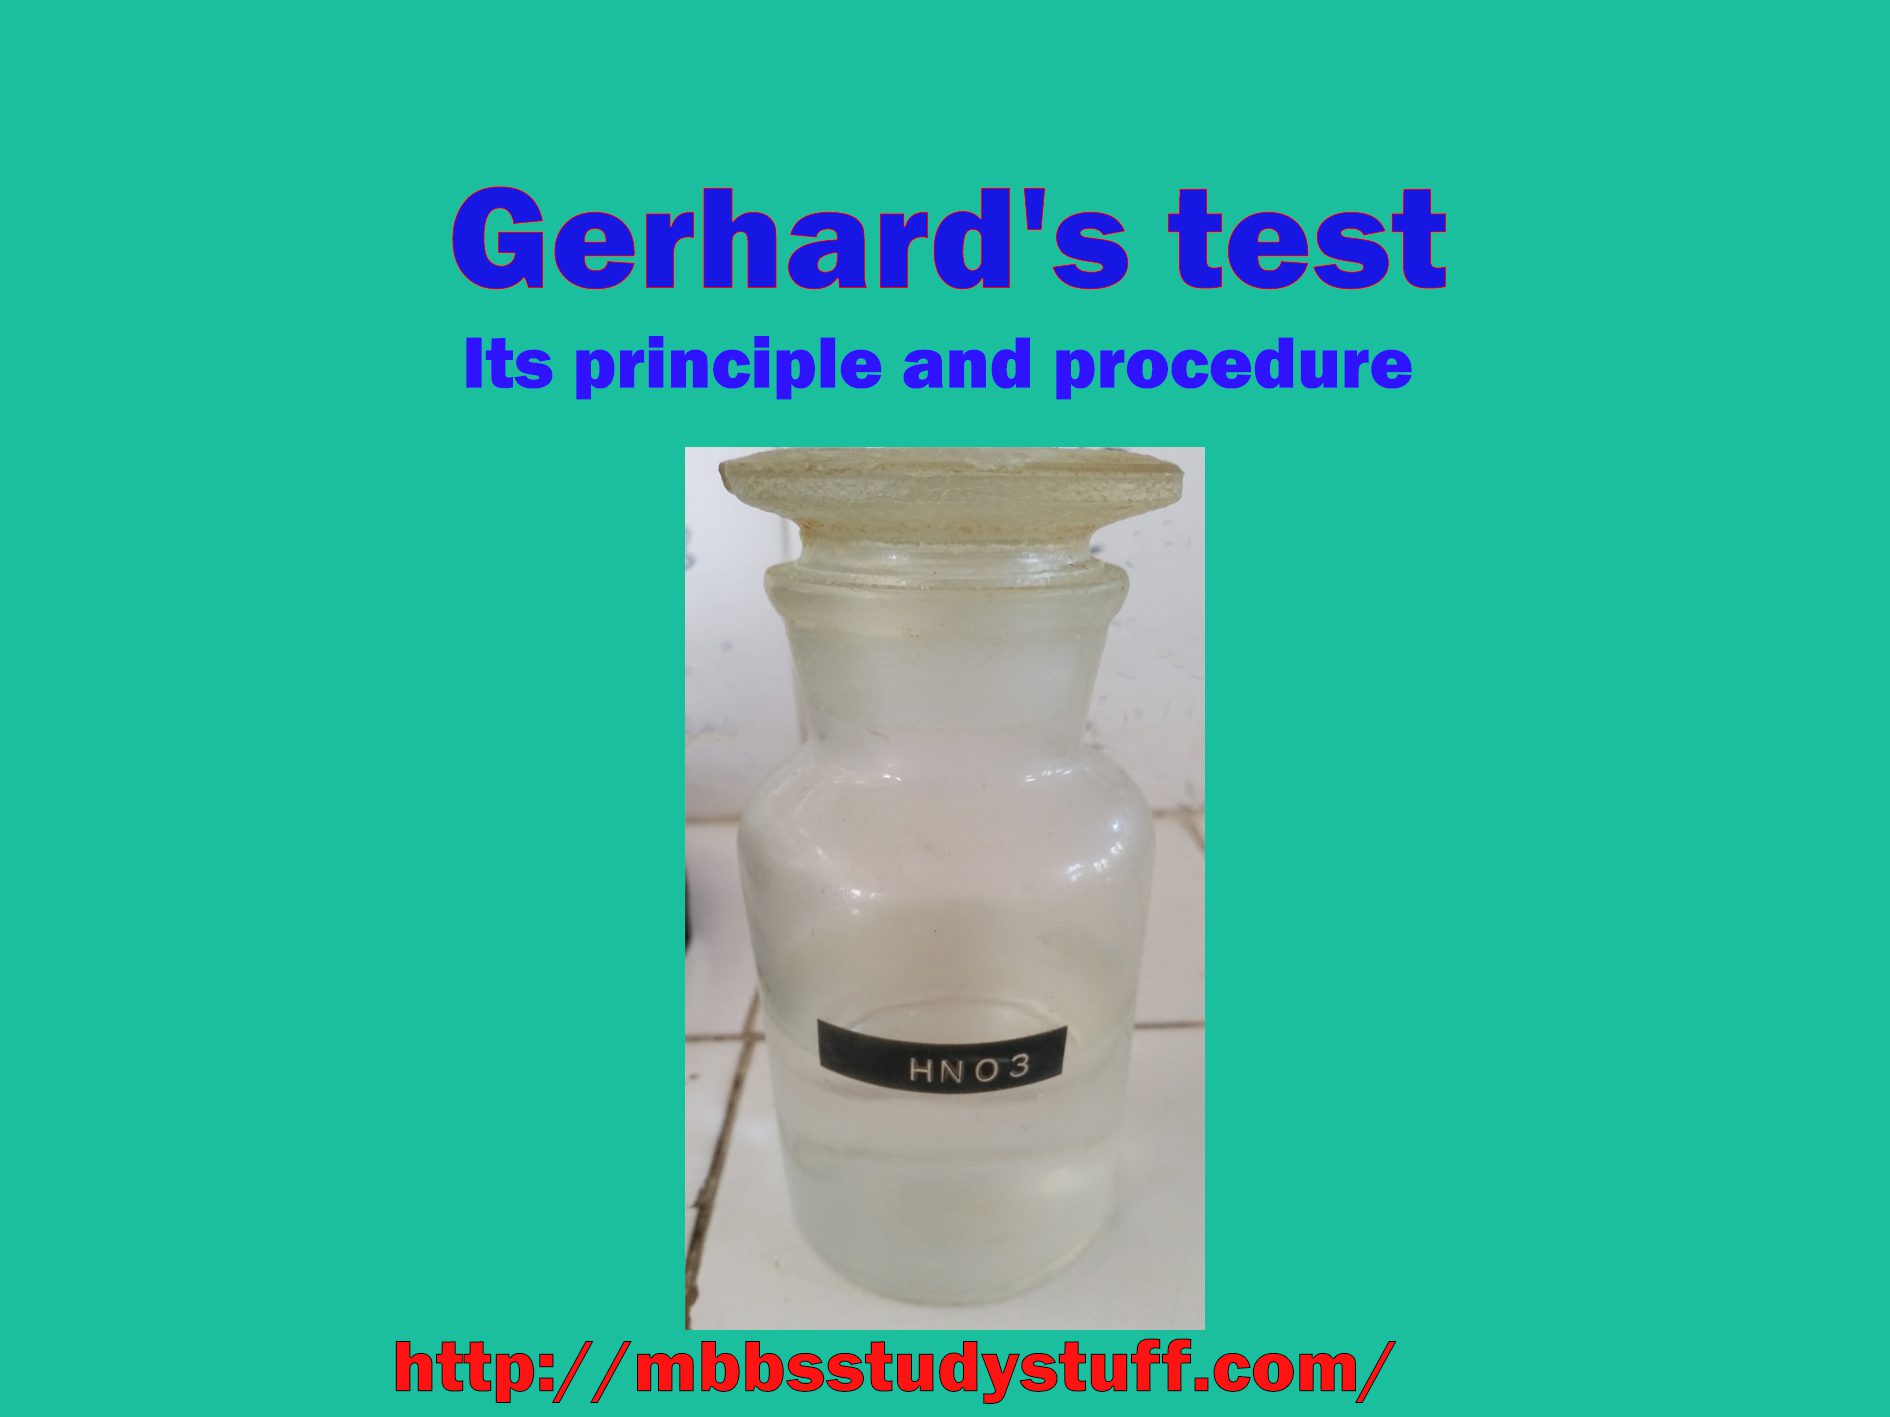 Gerhard’s test for ketone bodies – Its principle and procedure